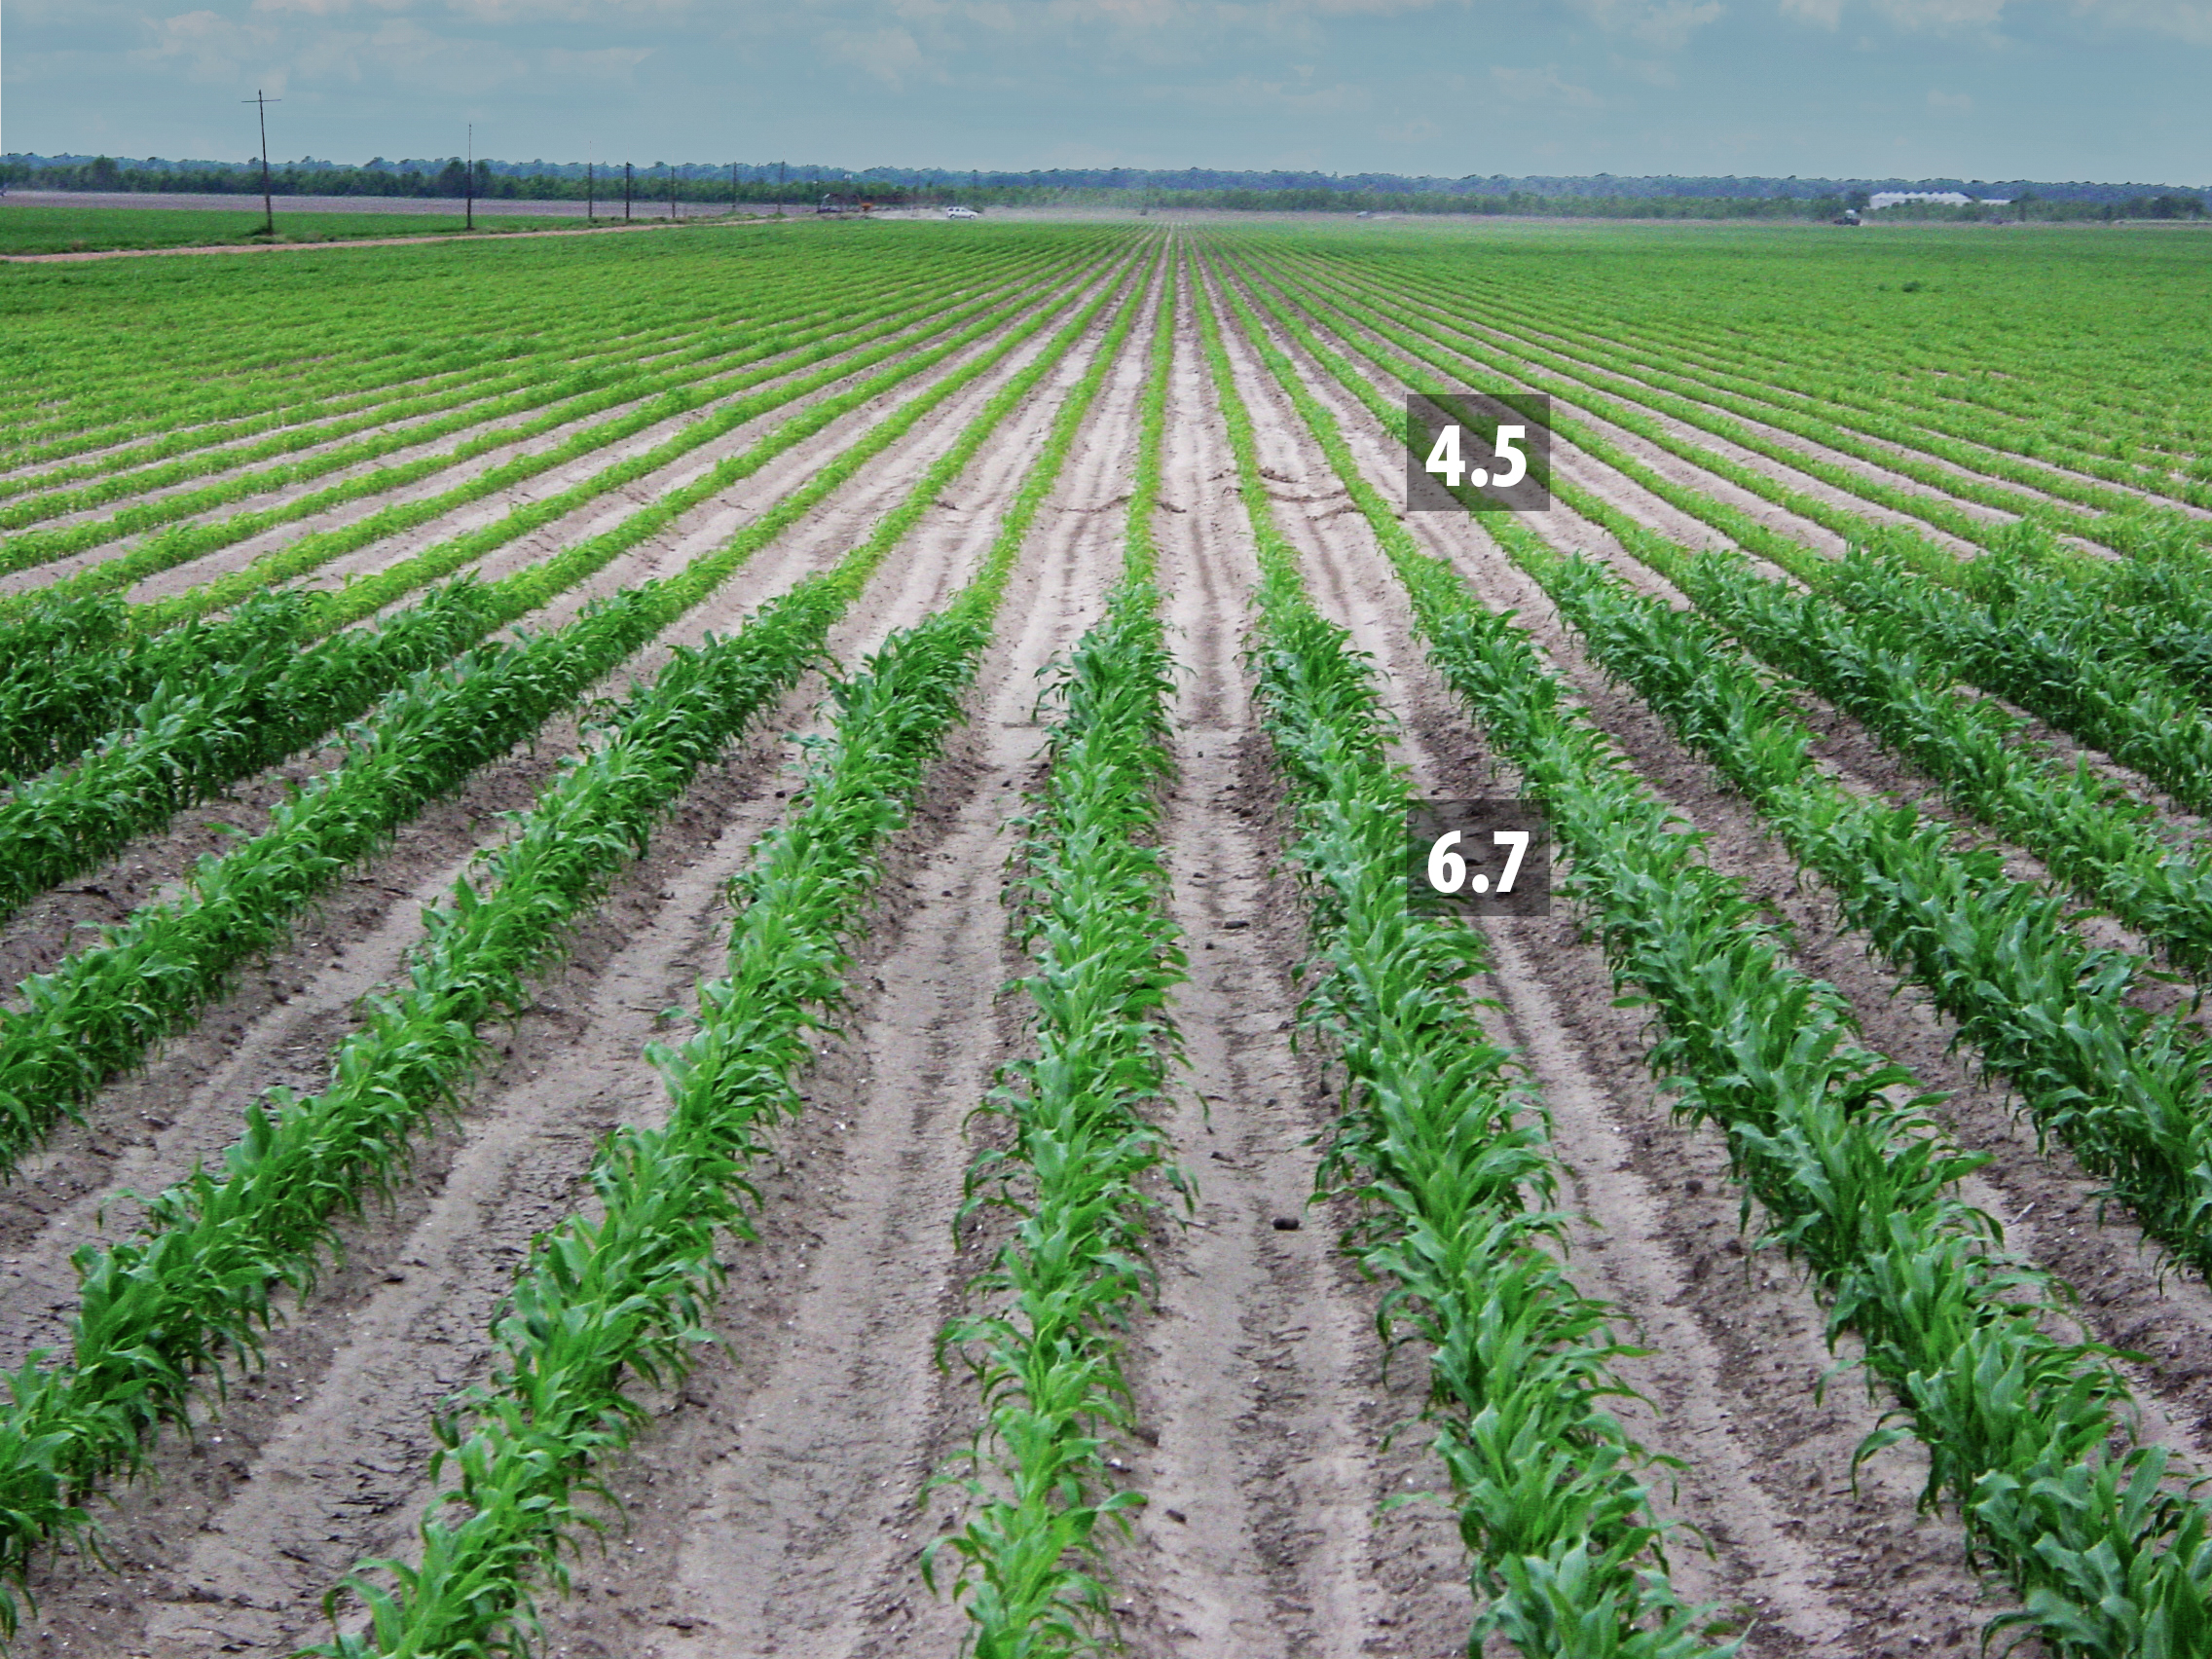 Rows of small corn plants. The plants in the foreground are labeled as having pH of 6.7 and are larger and greener than the plants in the background, which are labeled as having pH of 4.5.